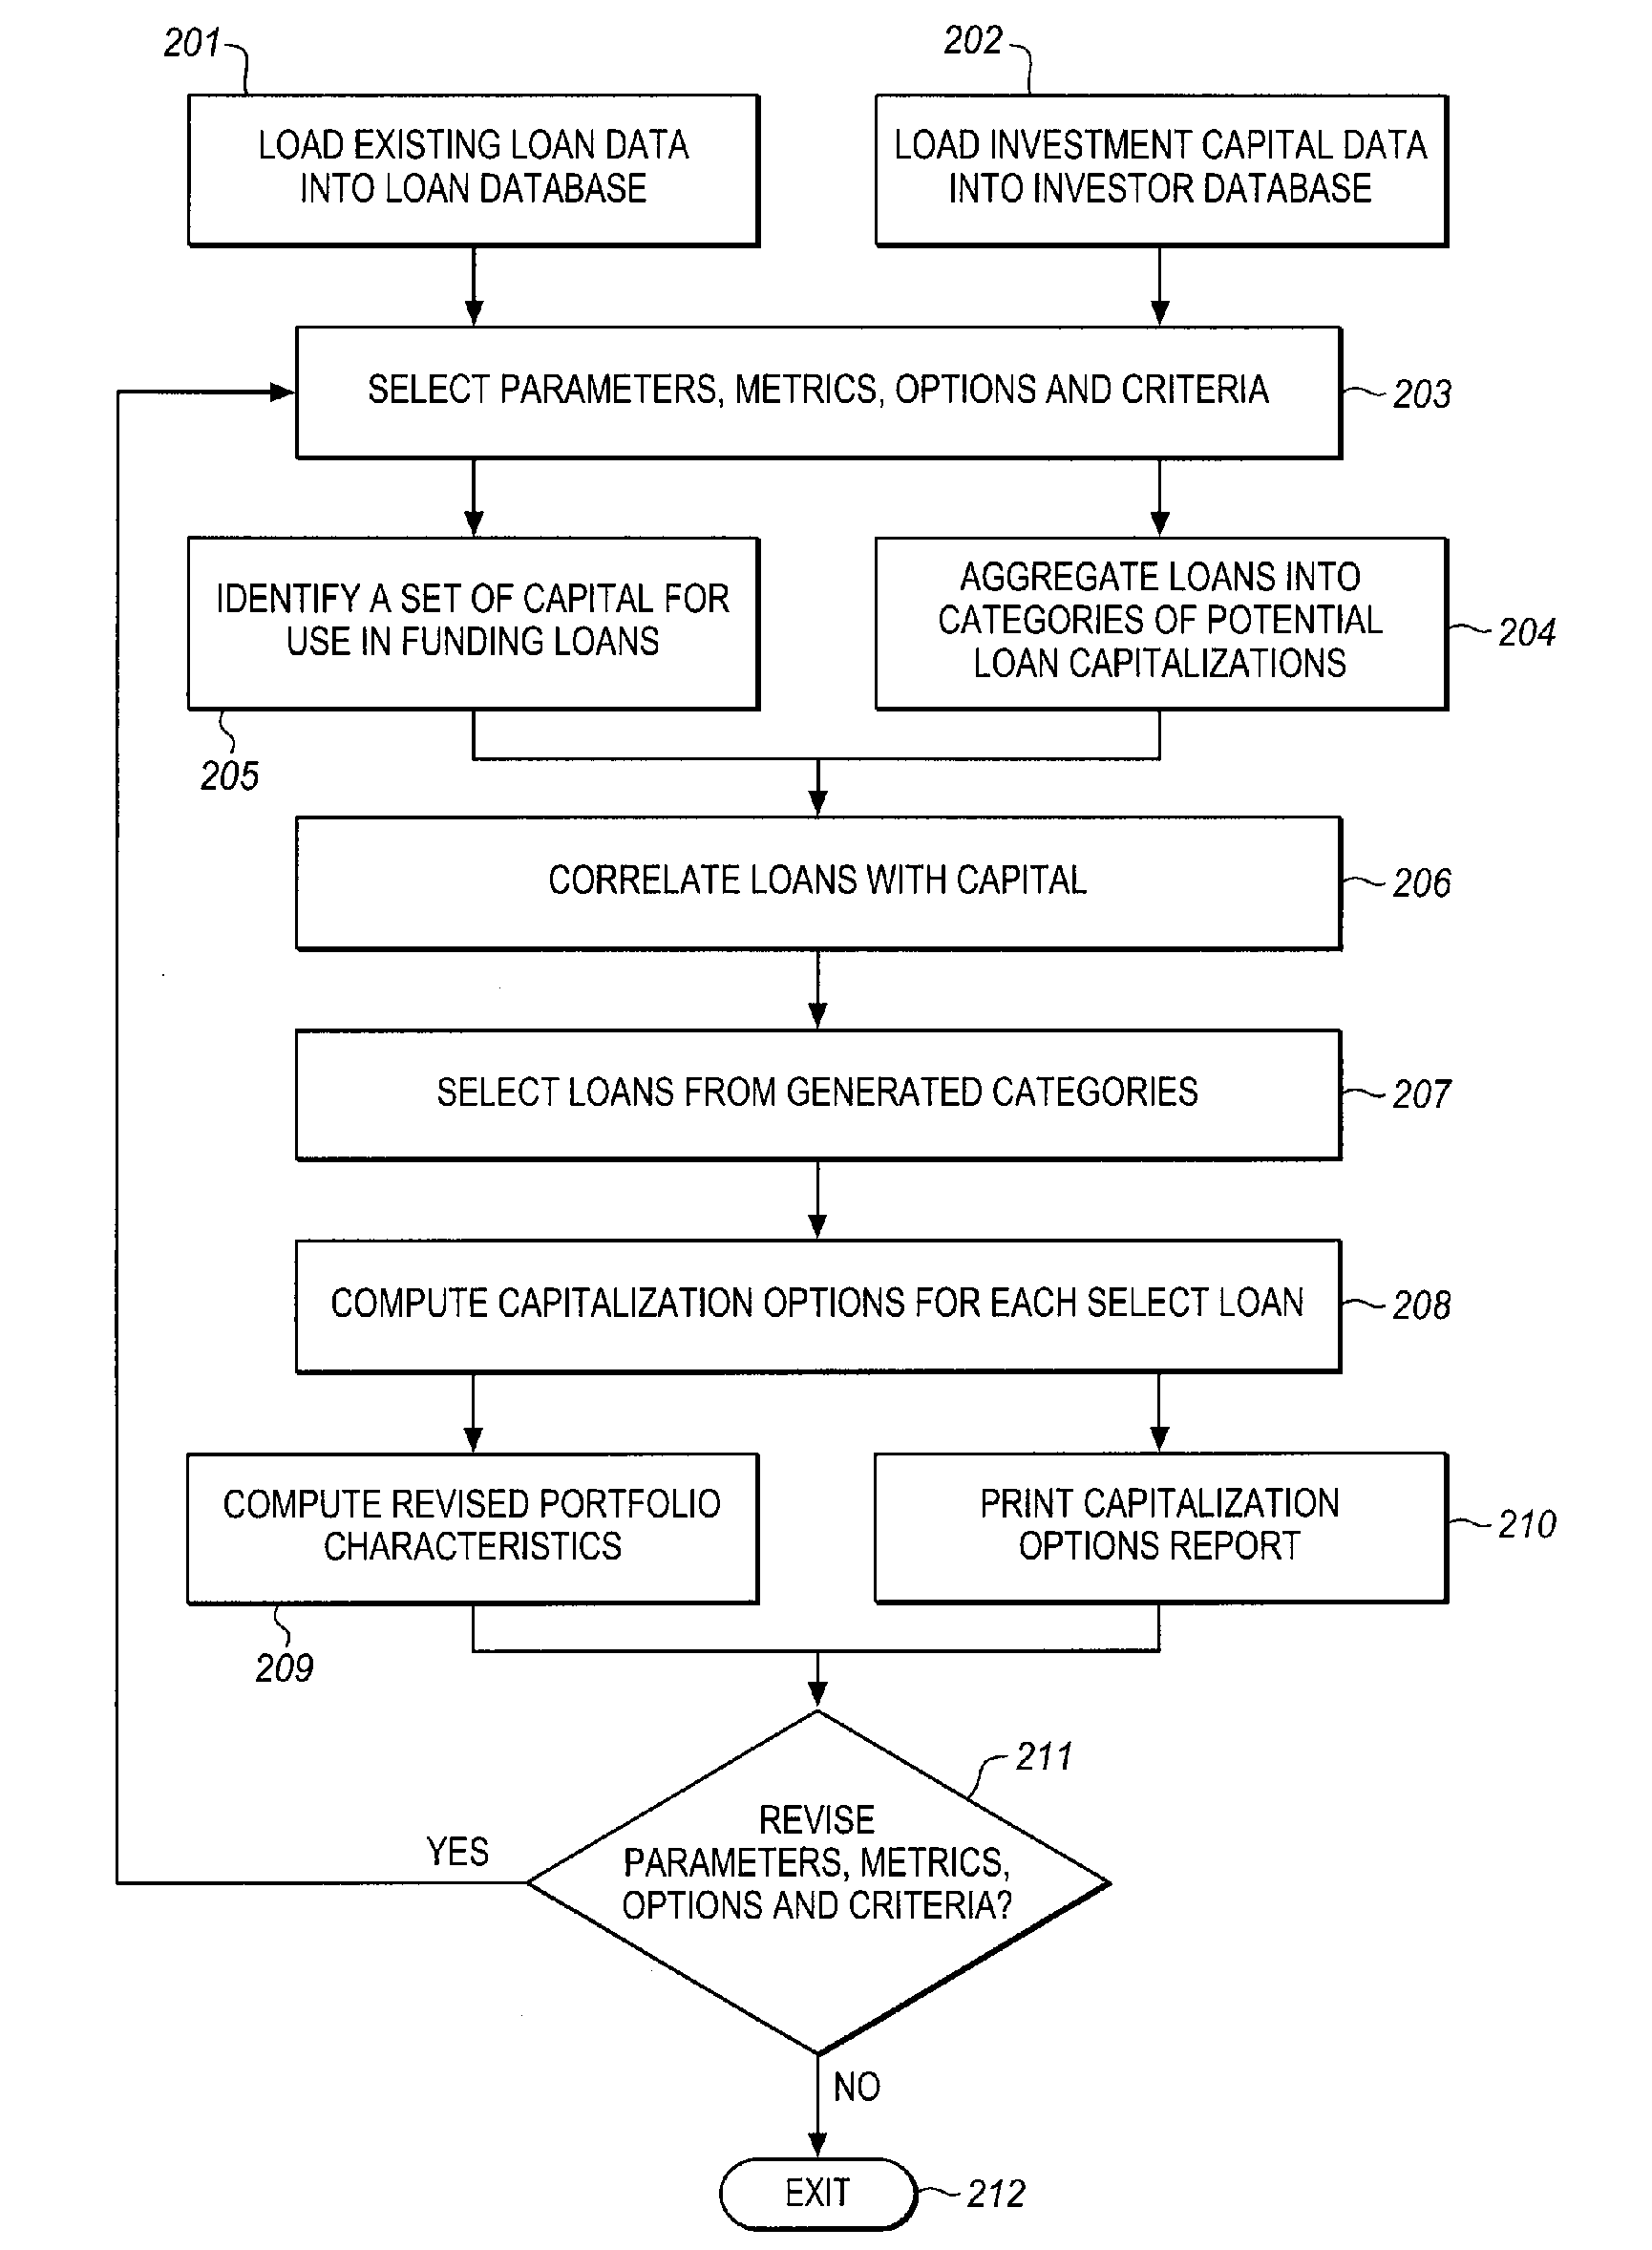 Automated system for compiling a plurality of existing mortgage loans for intra-loan restructuring of risk via capital infusion and dynamic resetting of loan terms and conditions